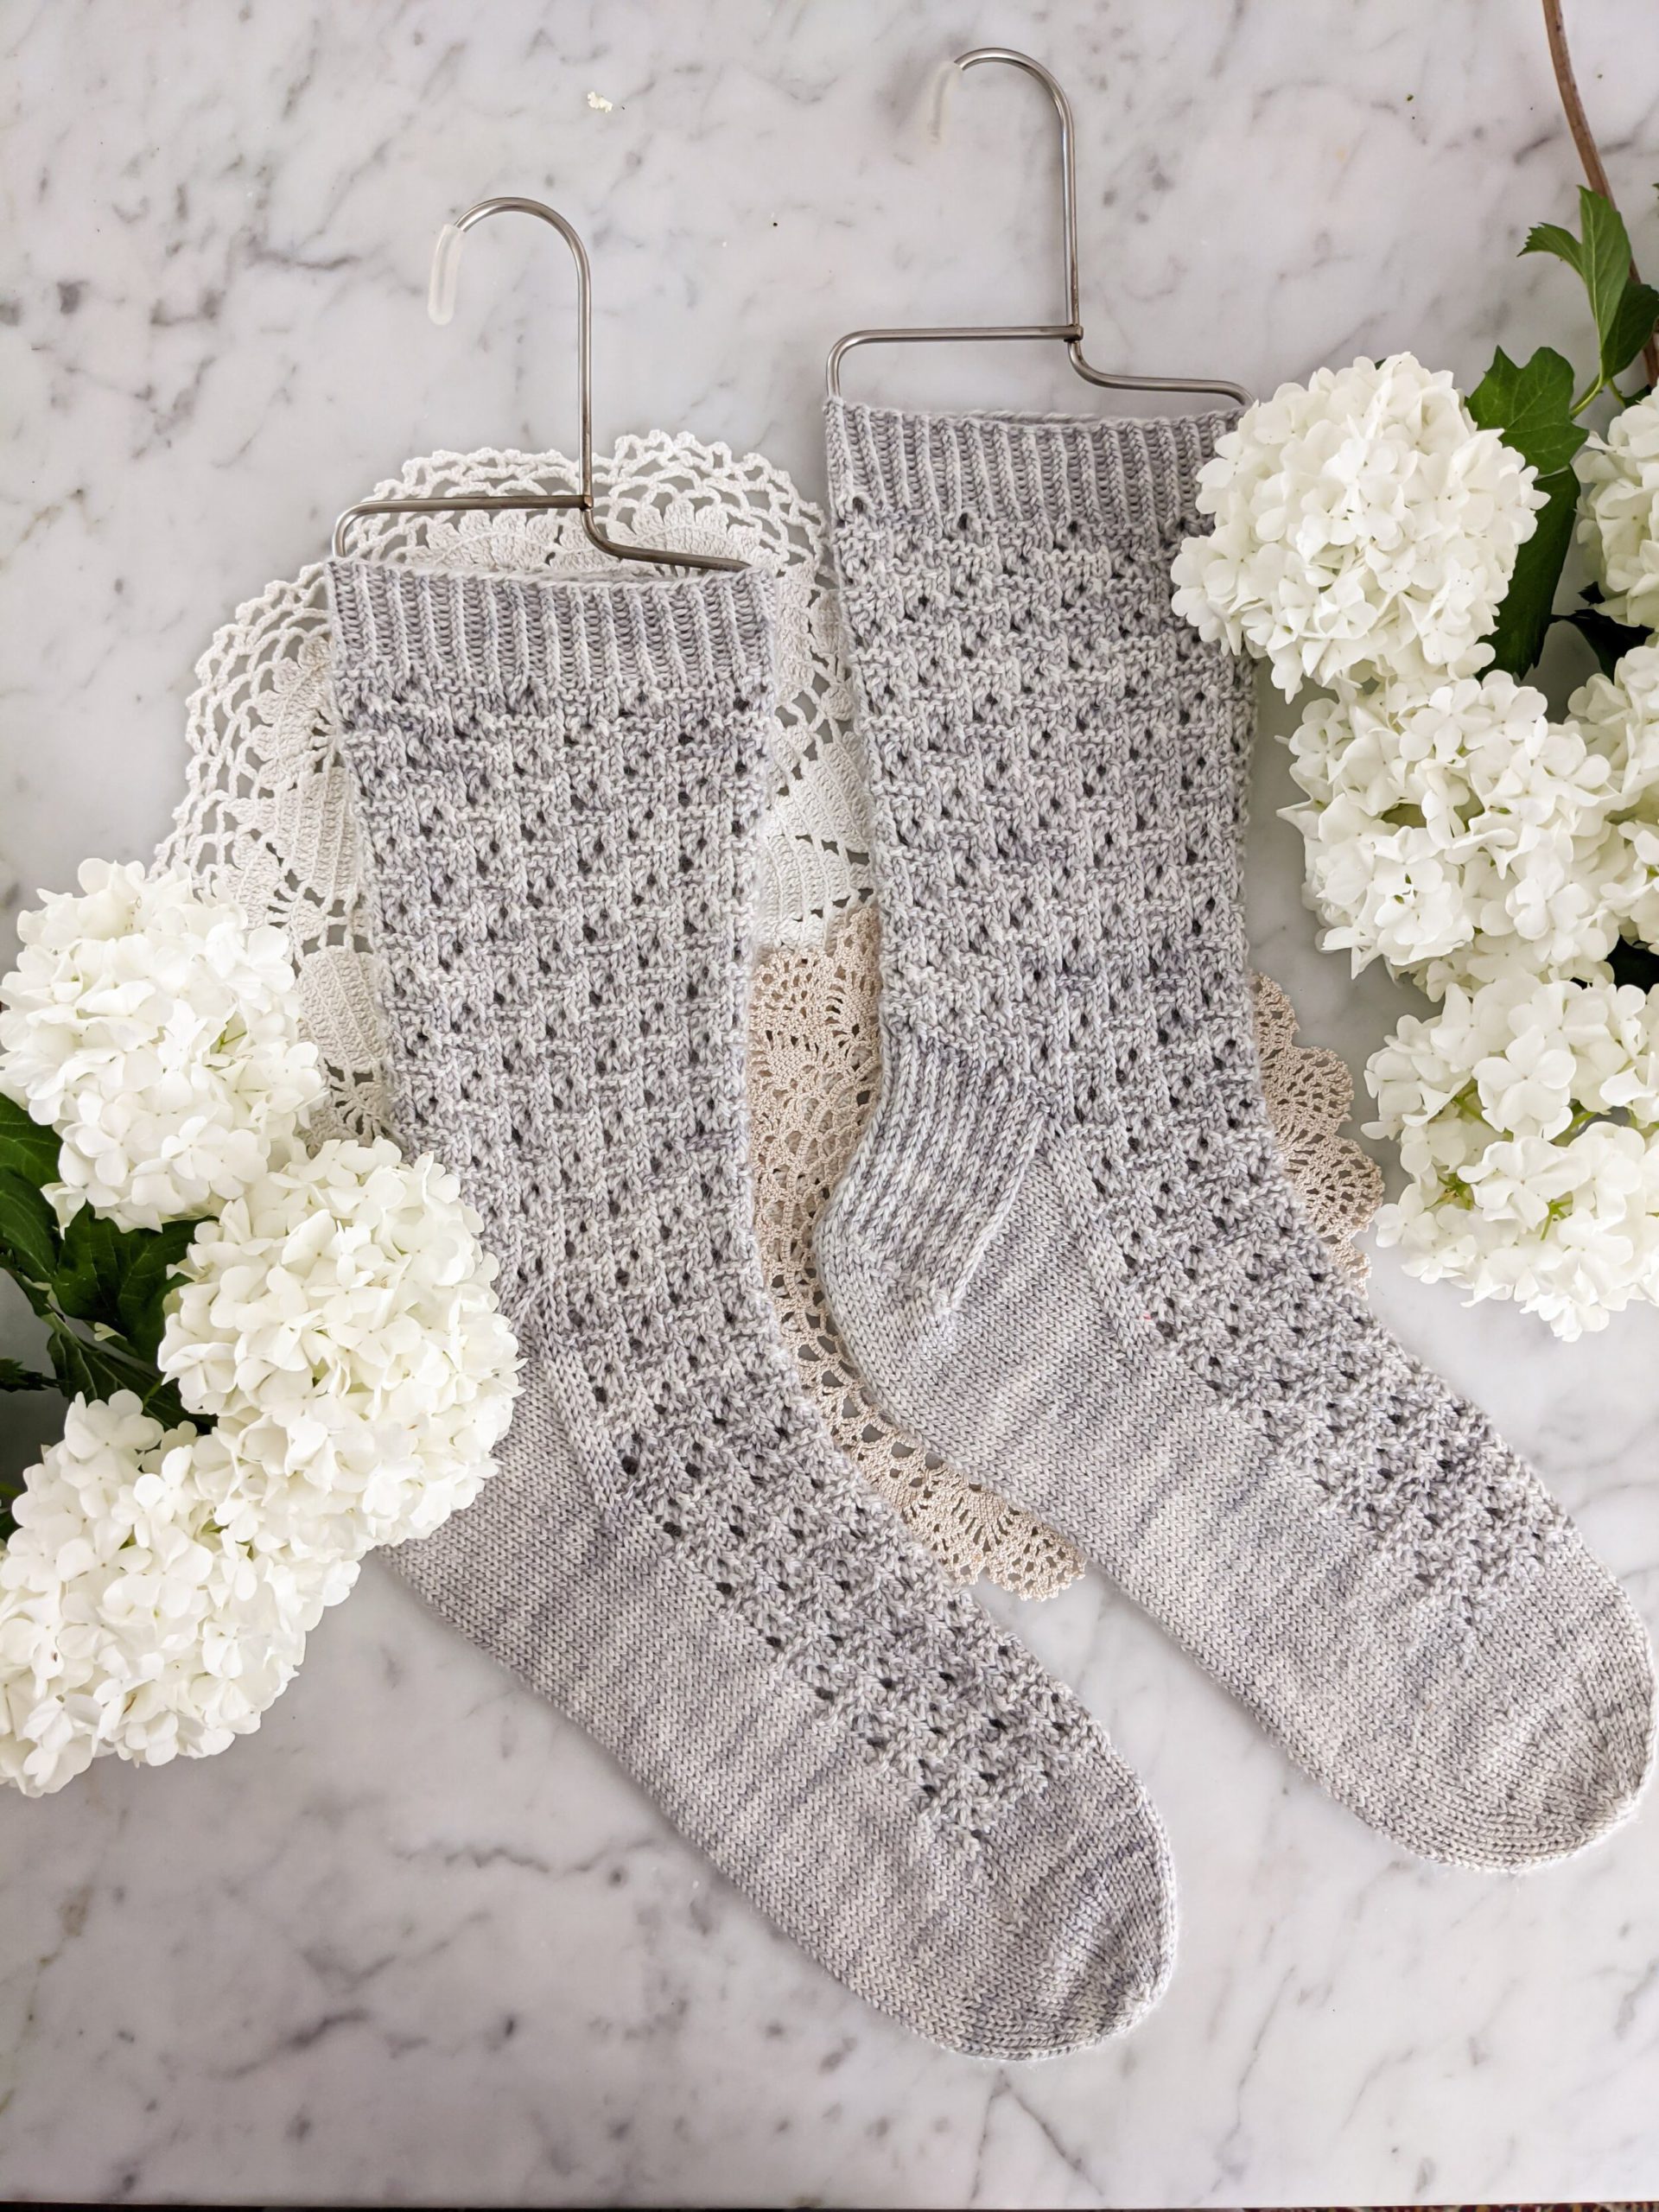 Things I will and won't do again in cuff-down knitted socks